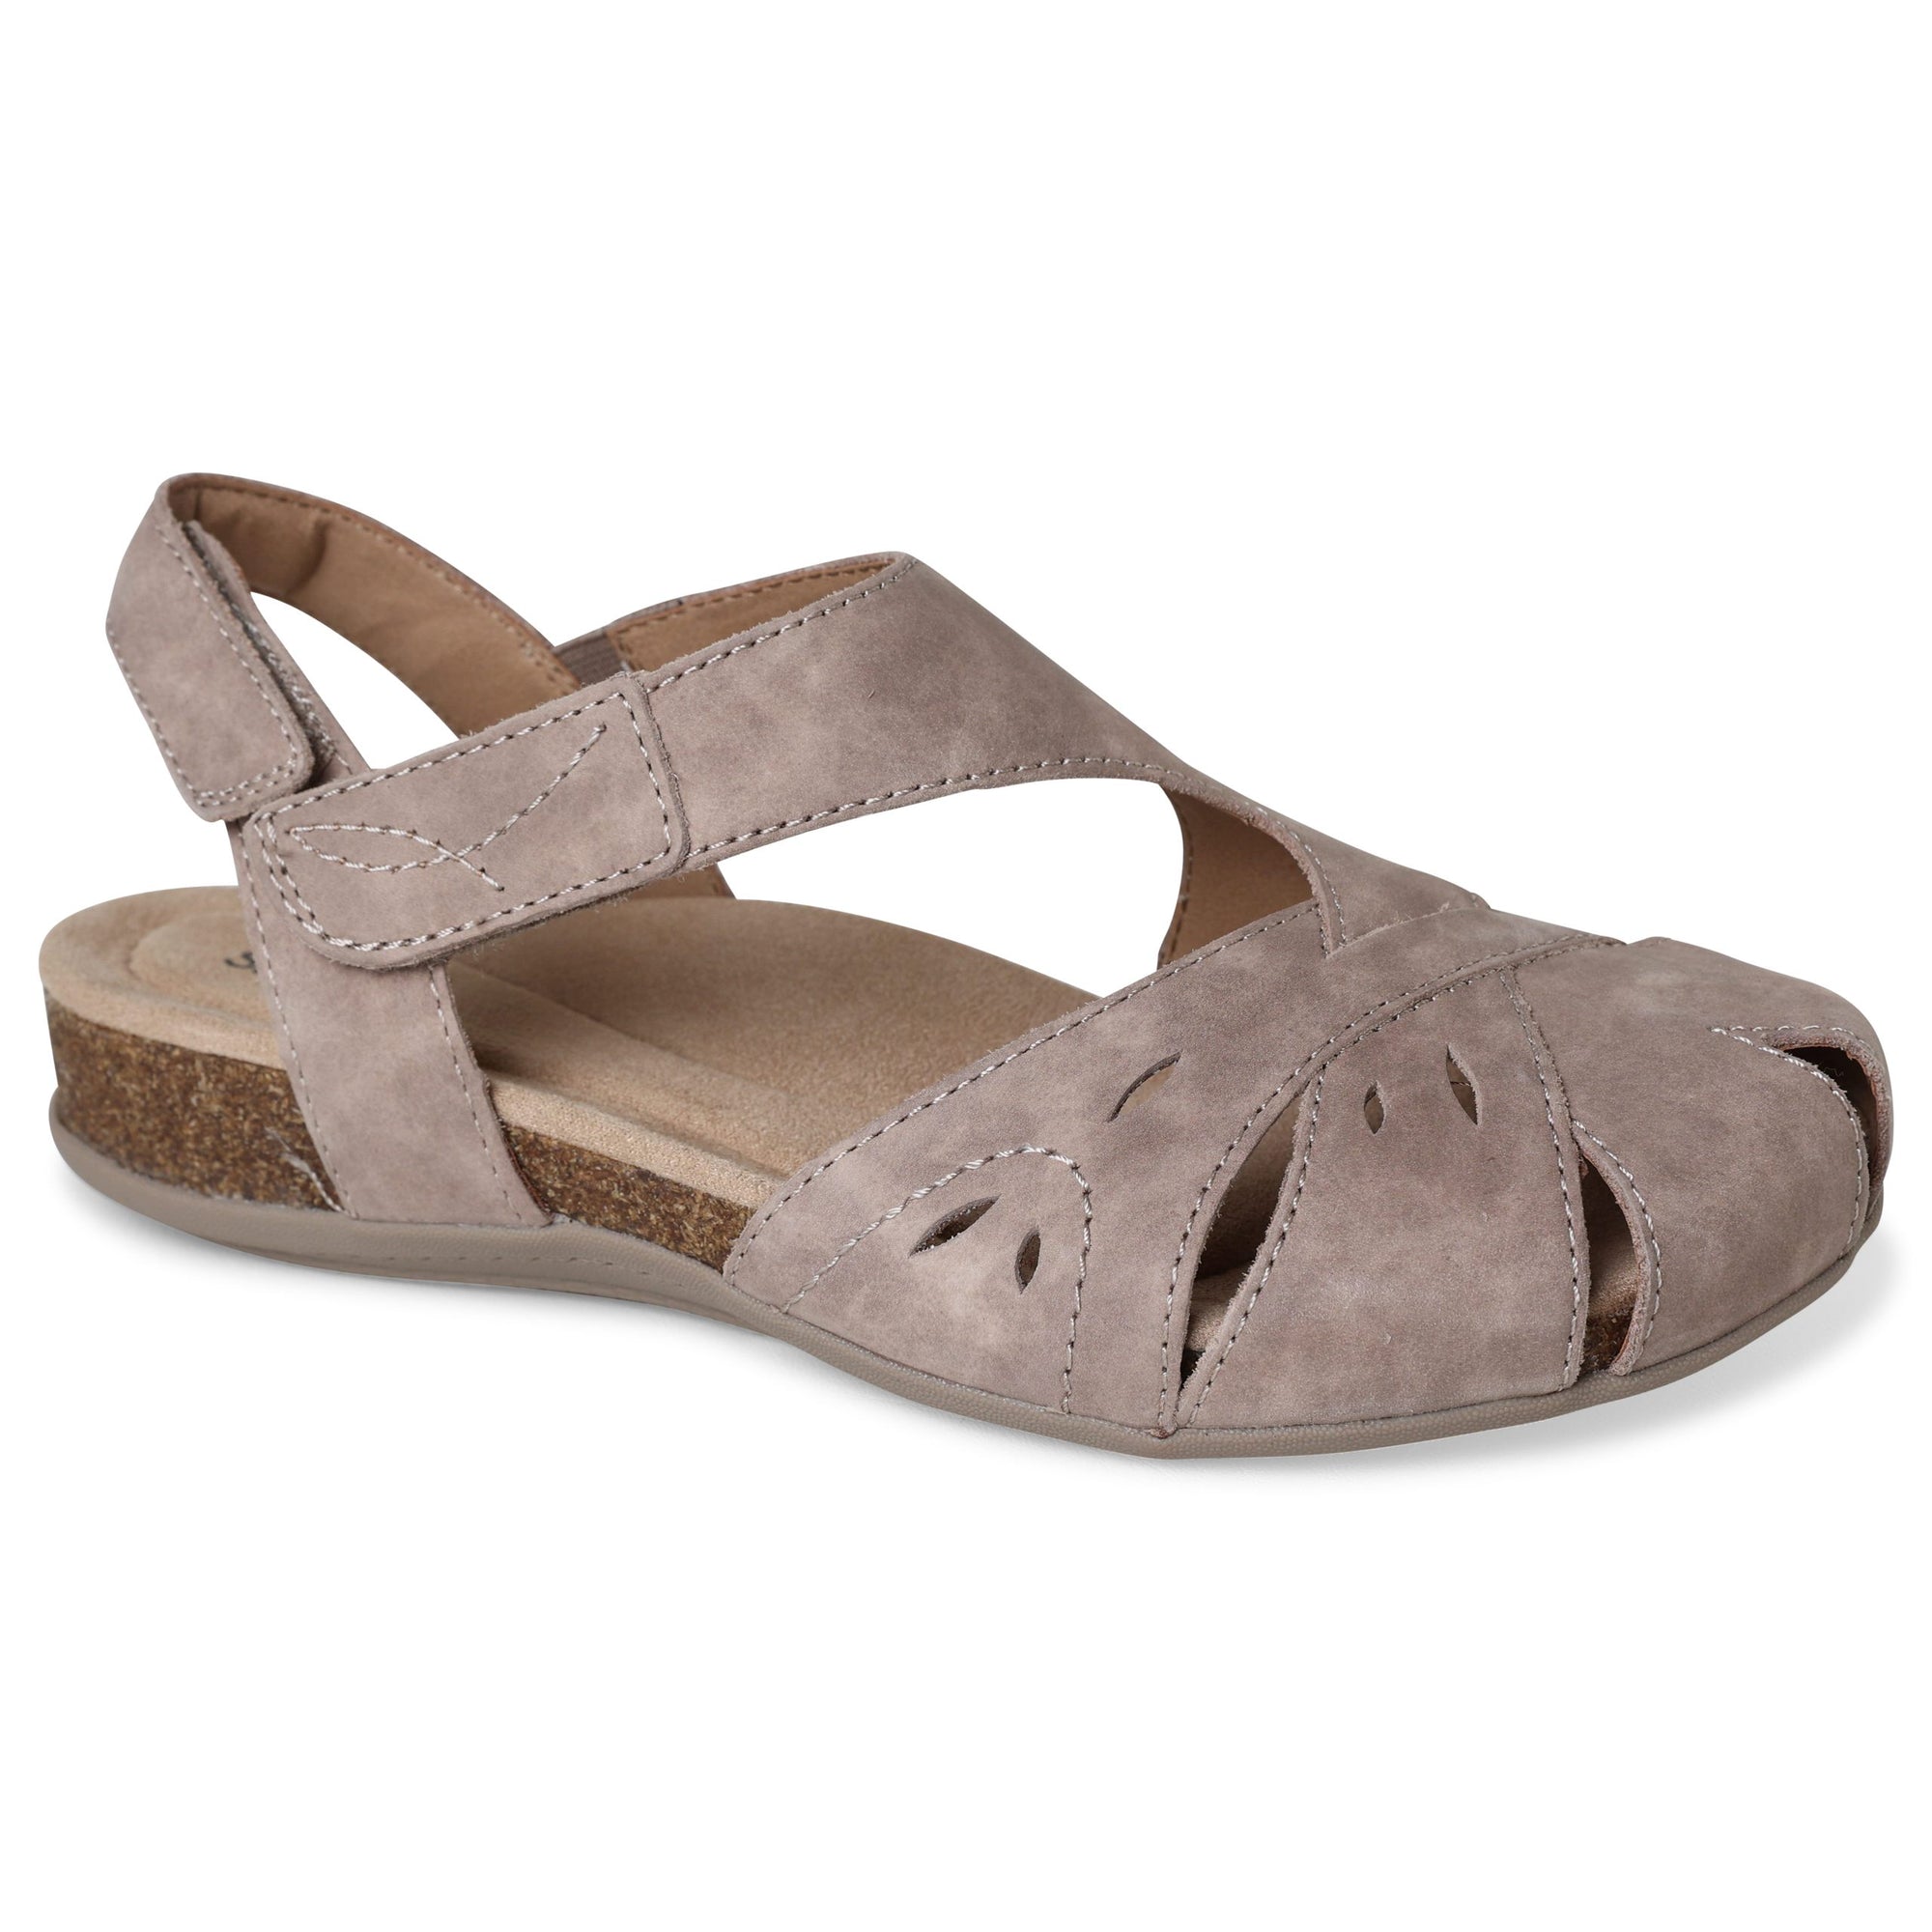 Birdine Cocoa Sandals Online at Best Price | Planet Shoes